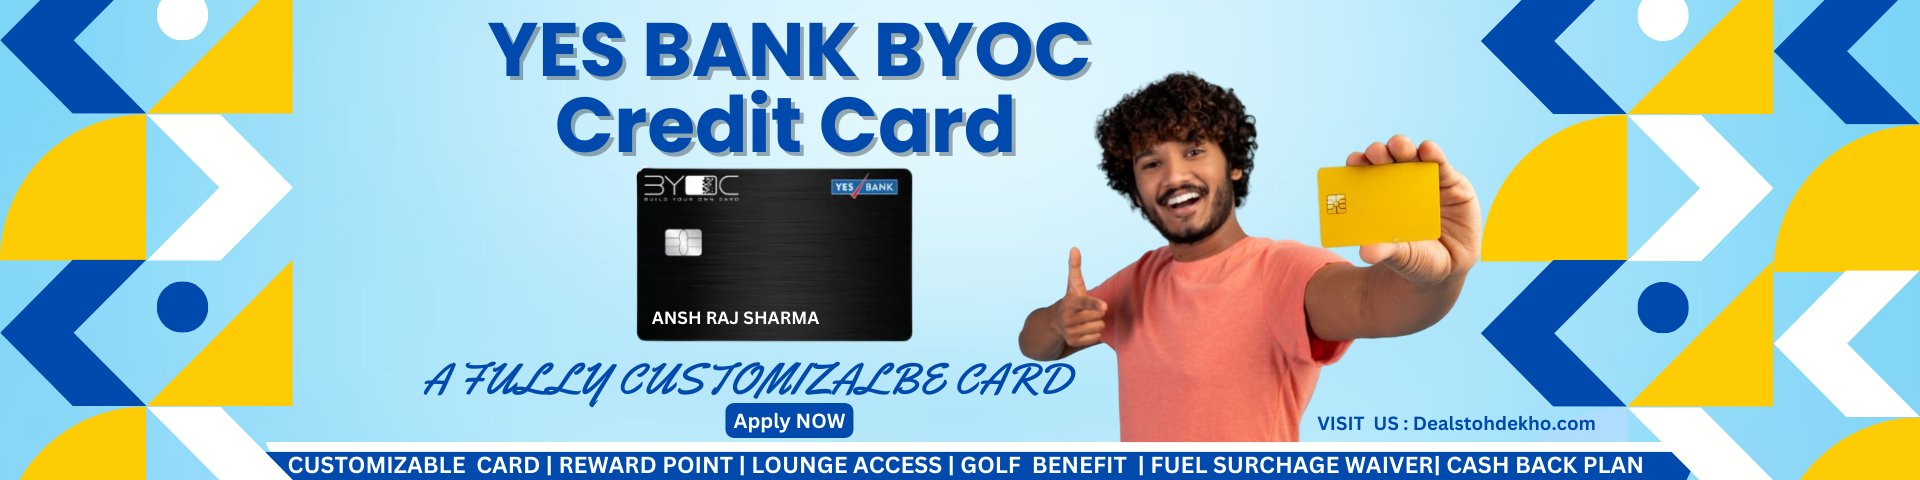 apply online and get instant approval for yes bank credit card